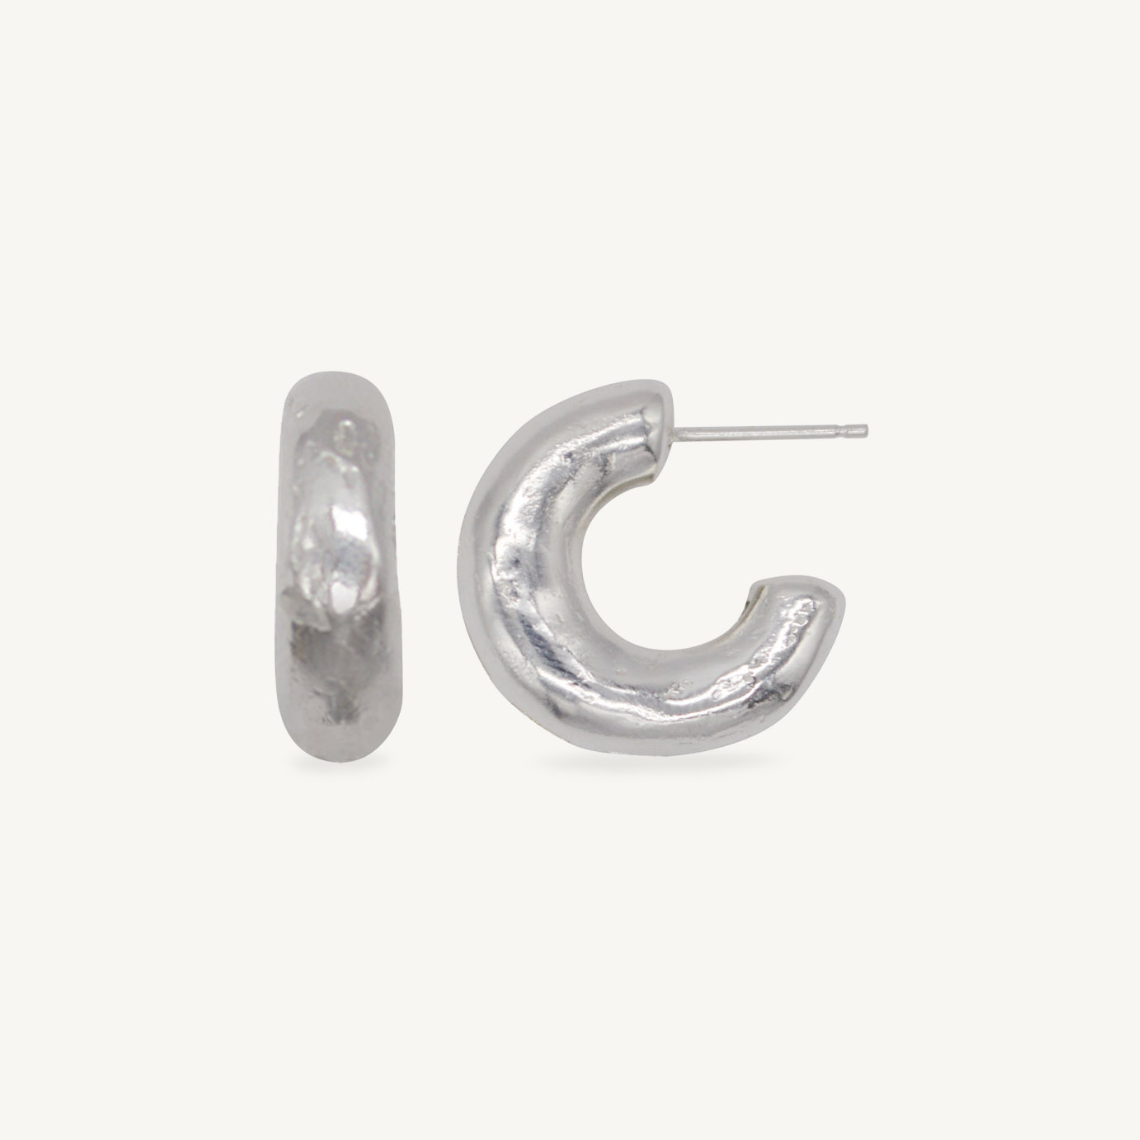 These chunky recycled silver statement hoop earrings with an organic texture are ethically handmade in London by Folde Jewellery.